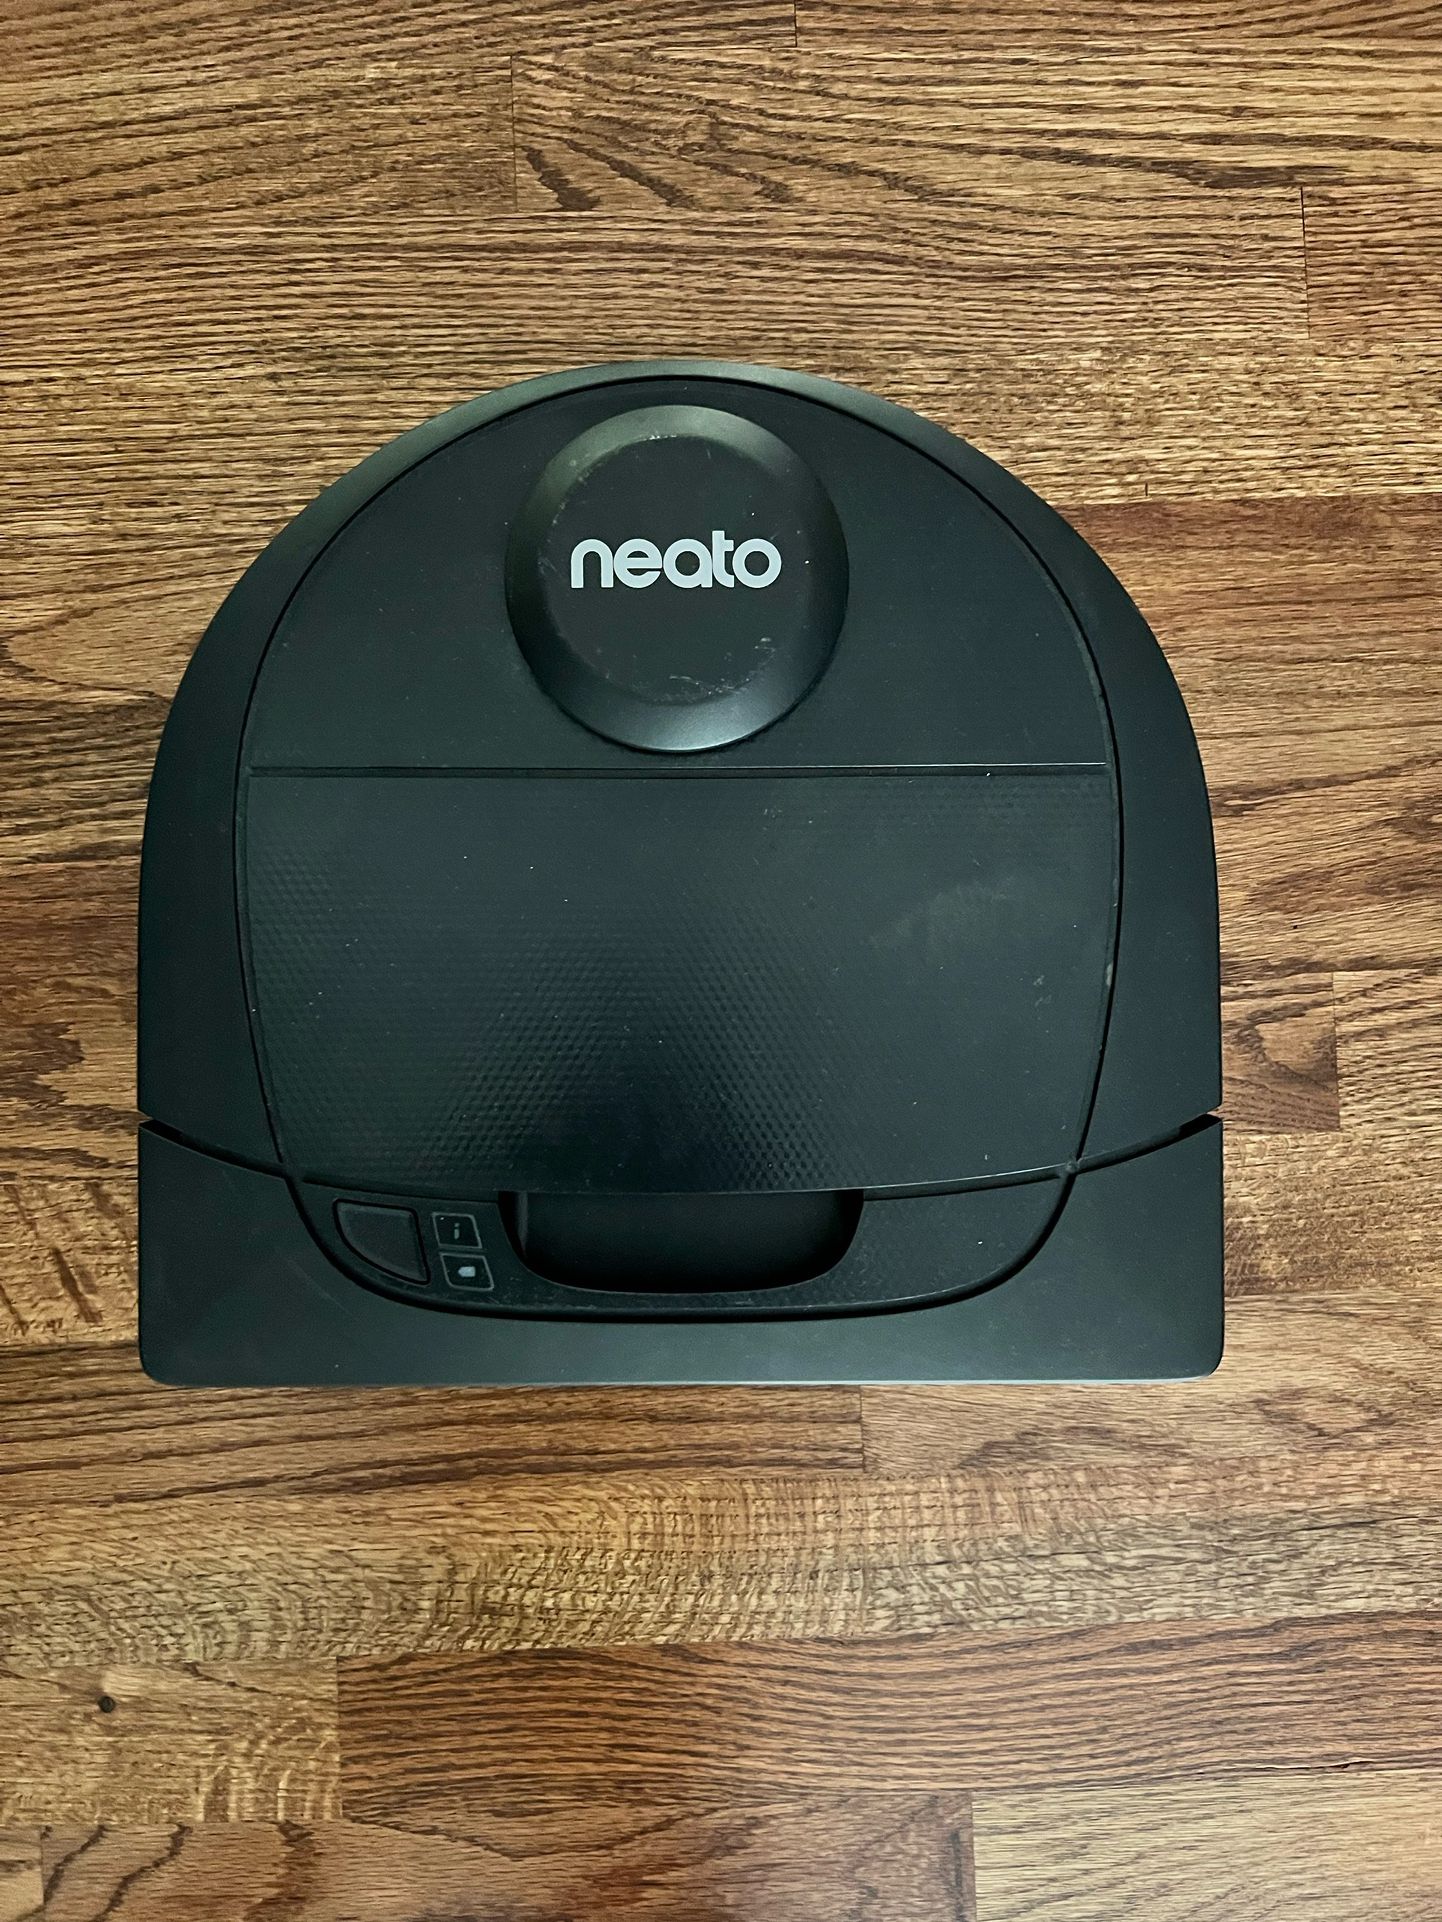 Neato Robotics D4 Laser Guided Smart Robot Vacuum - Wi-Fi Connected